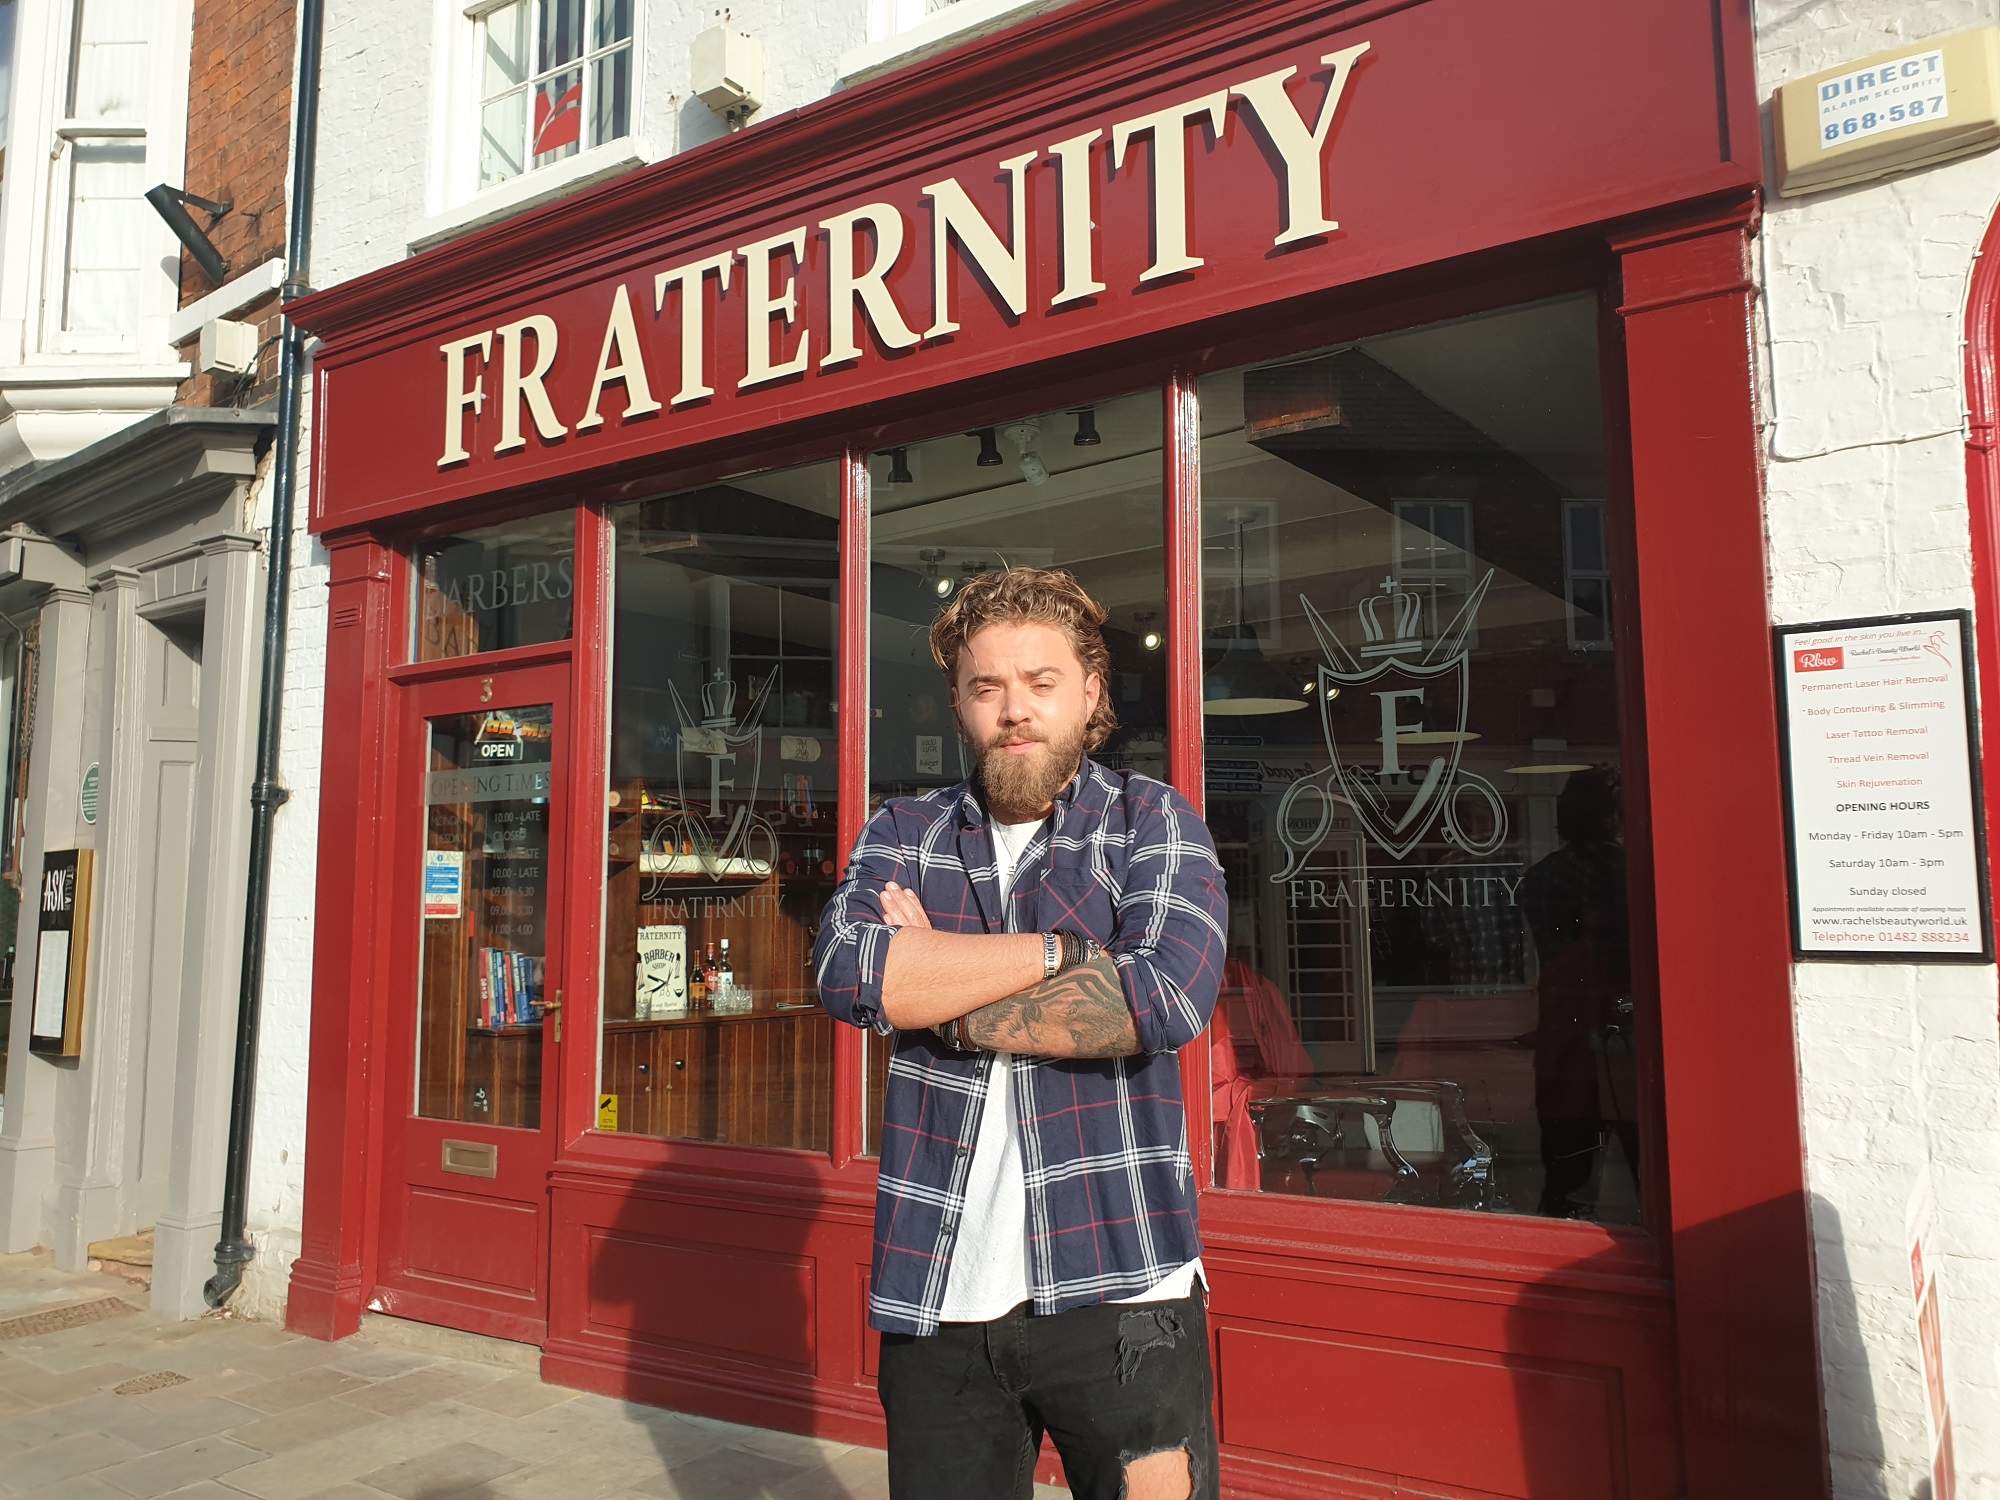 BEVERLEY’S NEWEST BARBER KEEN TO CREATE A ‘FRATERNITY’ IN WEDNESDAY MARKET